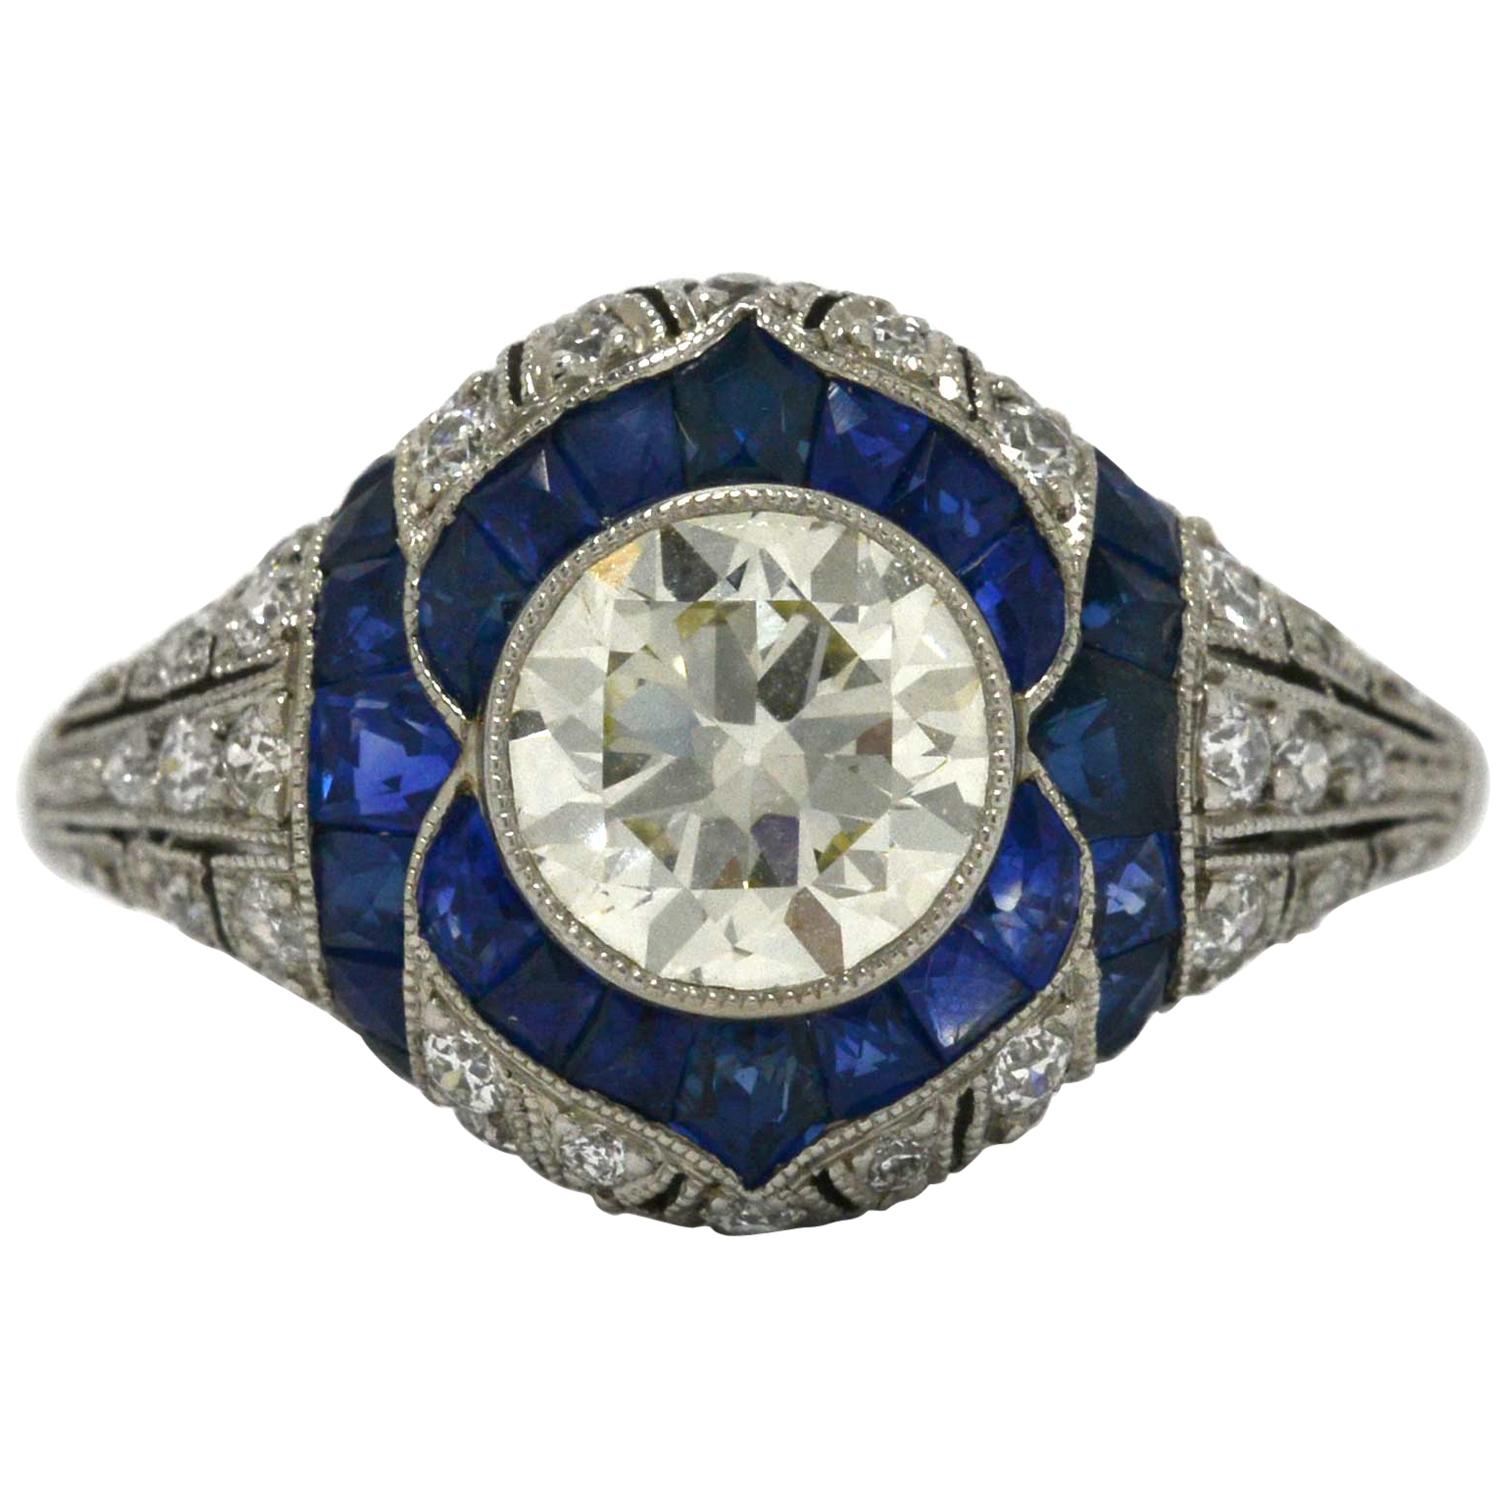 Old European Diamond Engagement Ring French Cut Sapphires